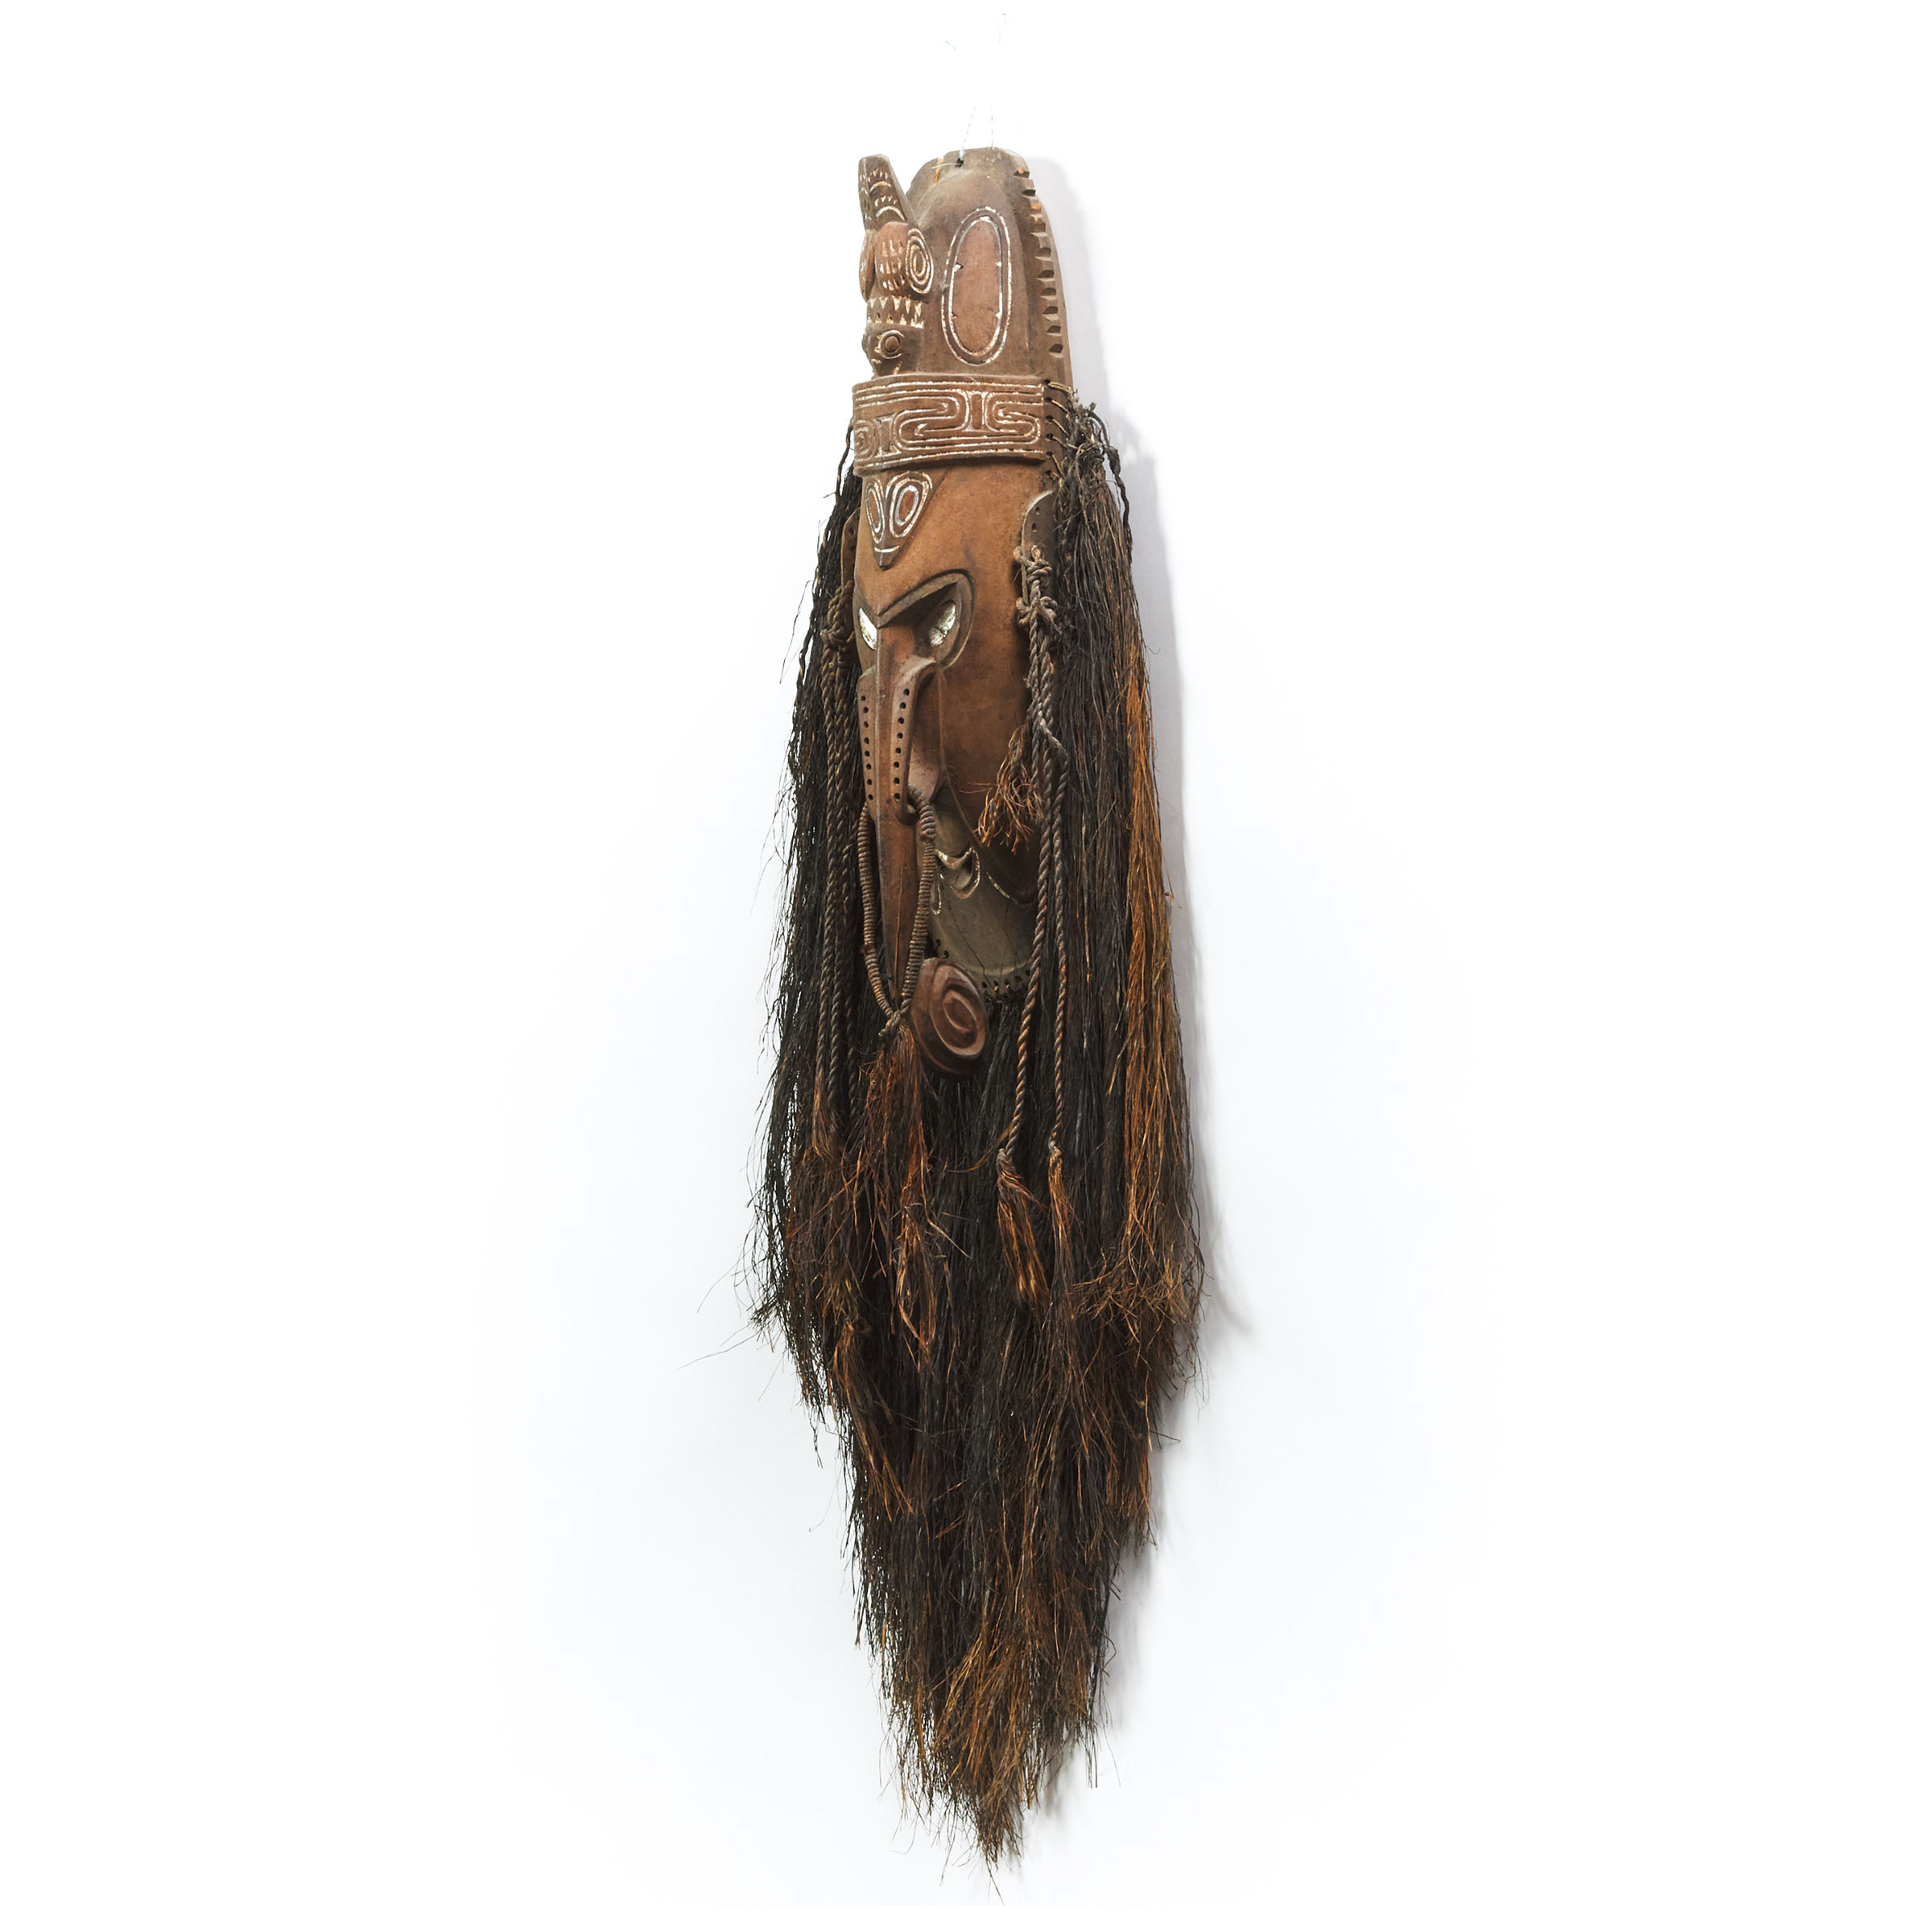 Sepik River Mei Mask, Papua New Guinea, early to mid 20th century